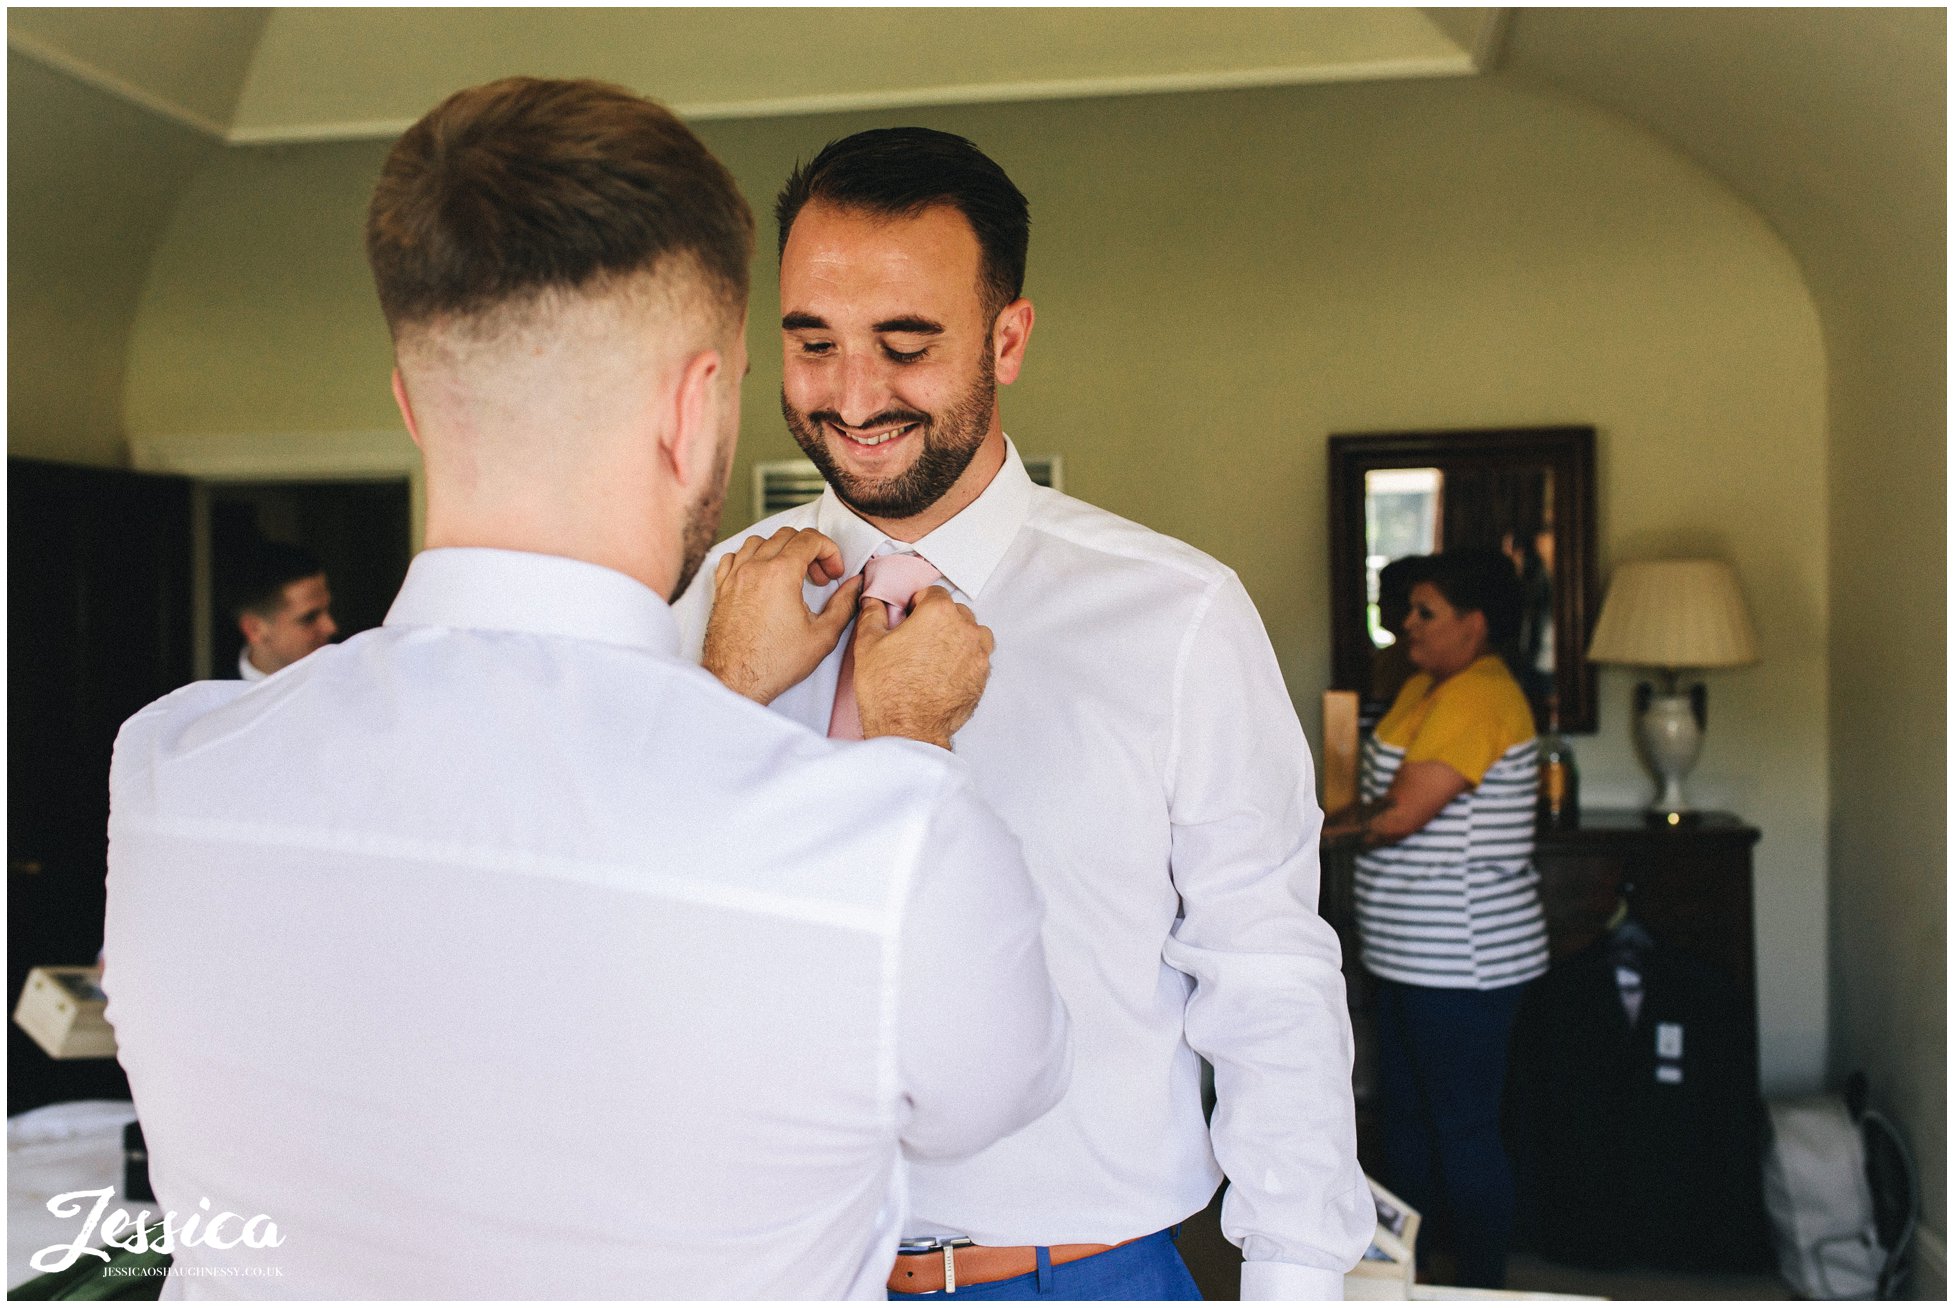 the best man helps the groom with his tie